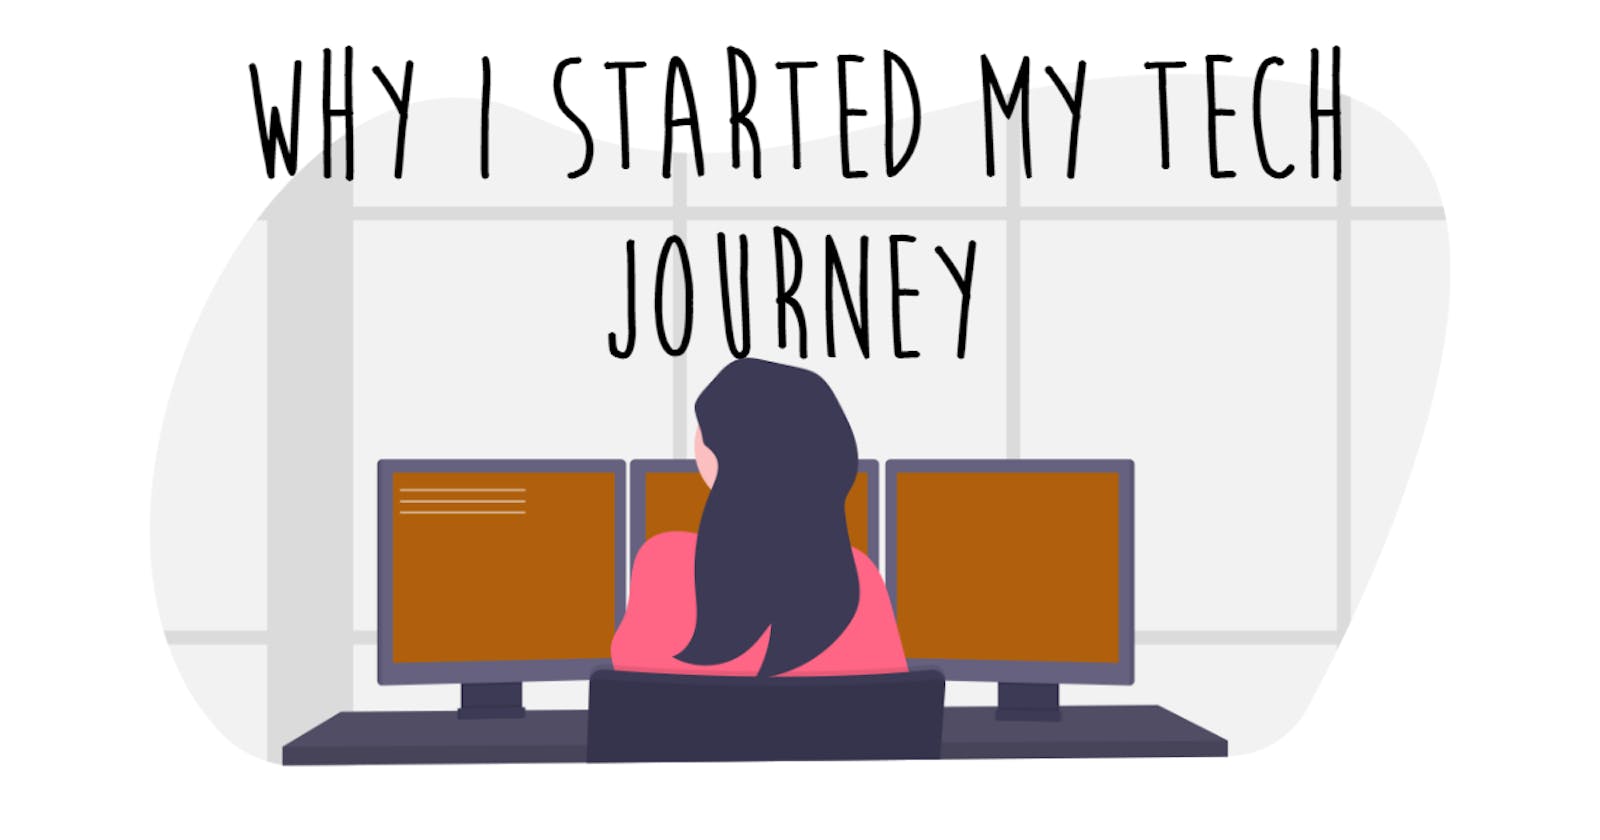 Why I Started my Tech Journey.